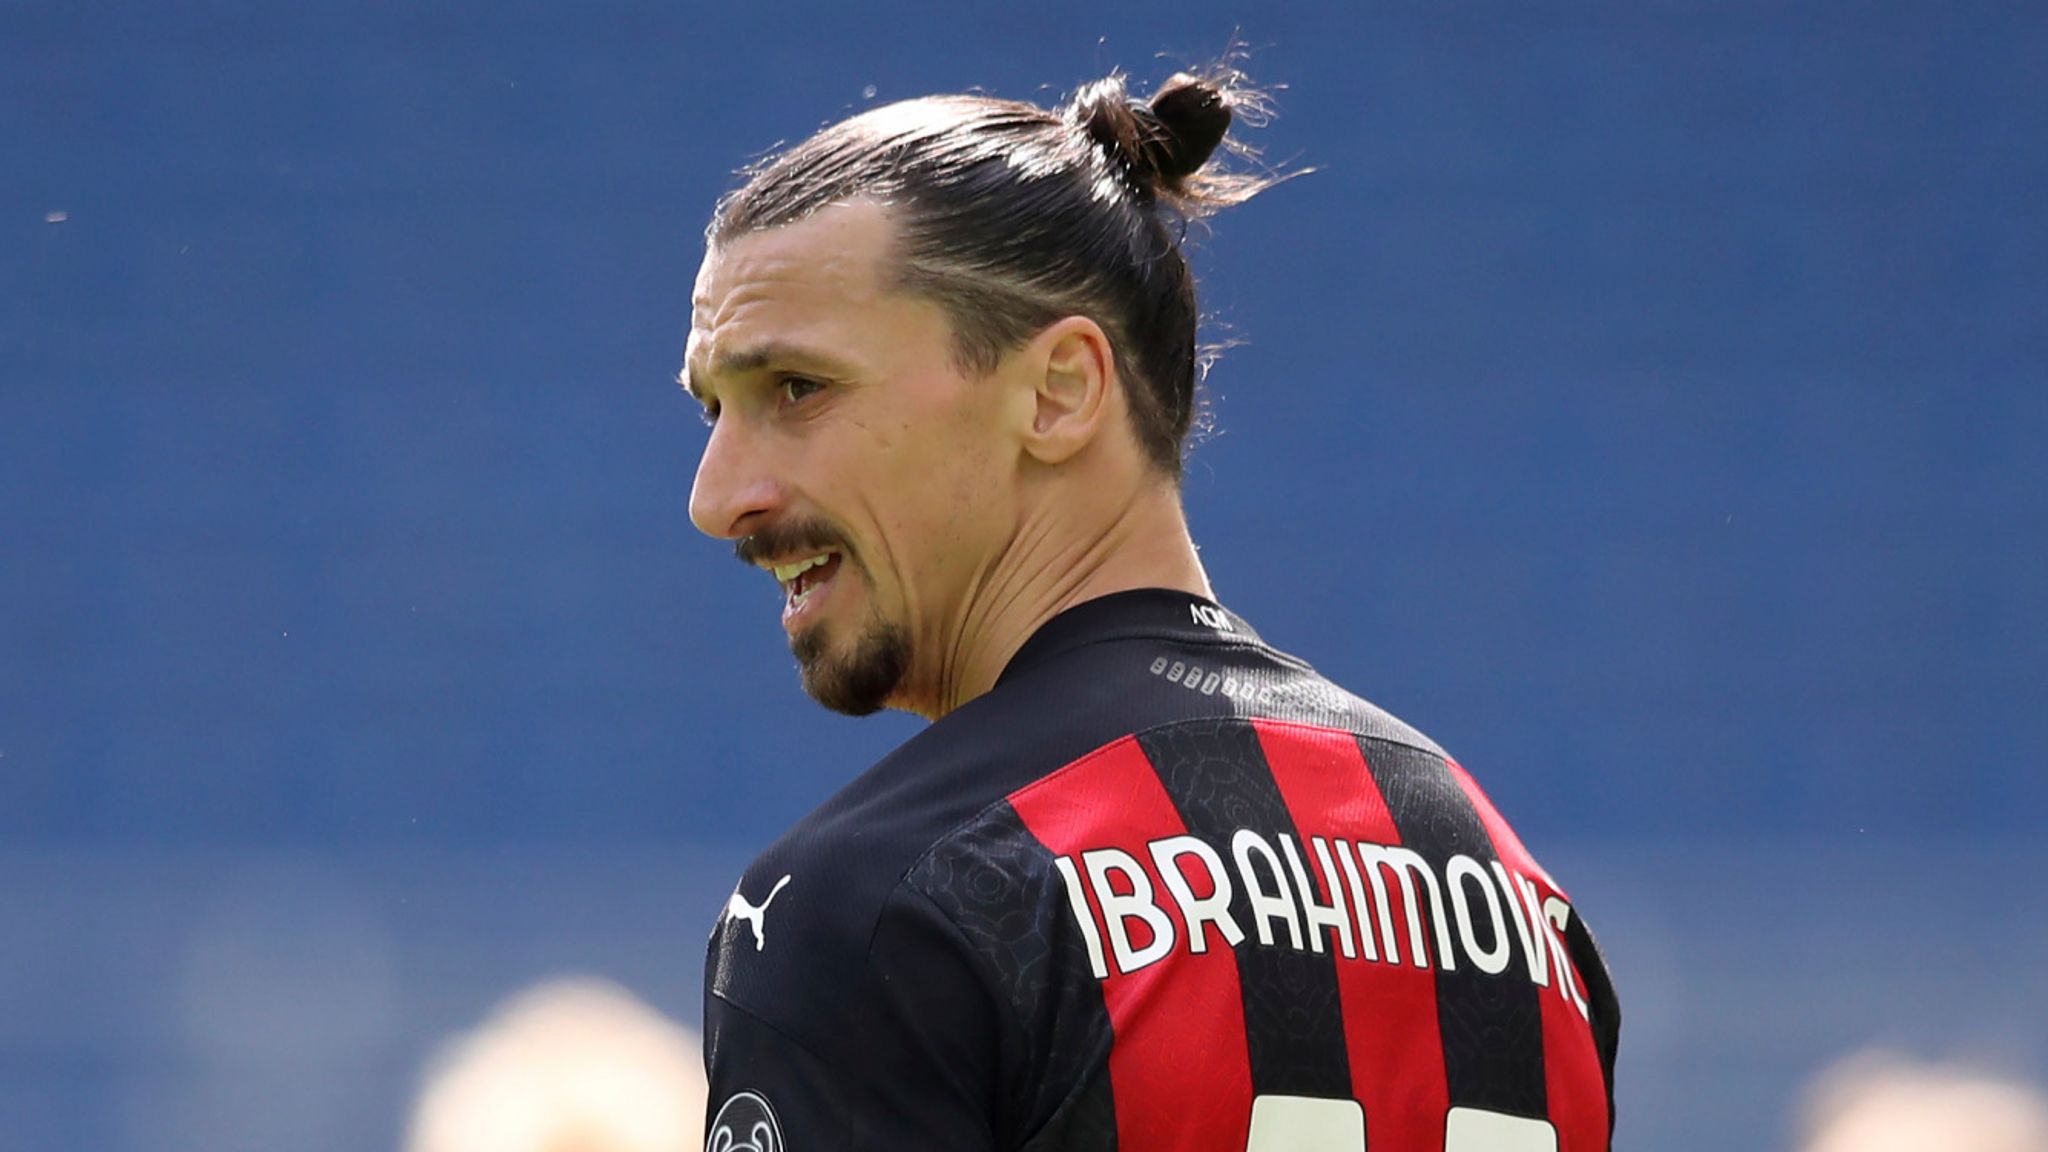 As Ibra sees red, Milan edge past Parma, Erlic lifts Spezia over Crotone